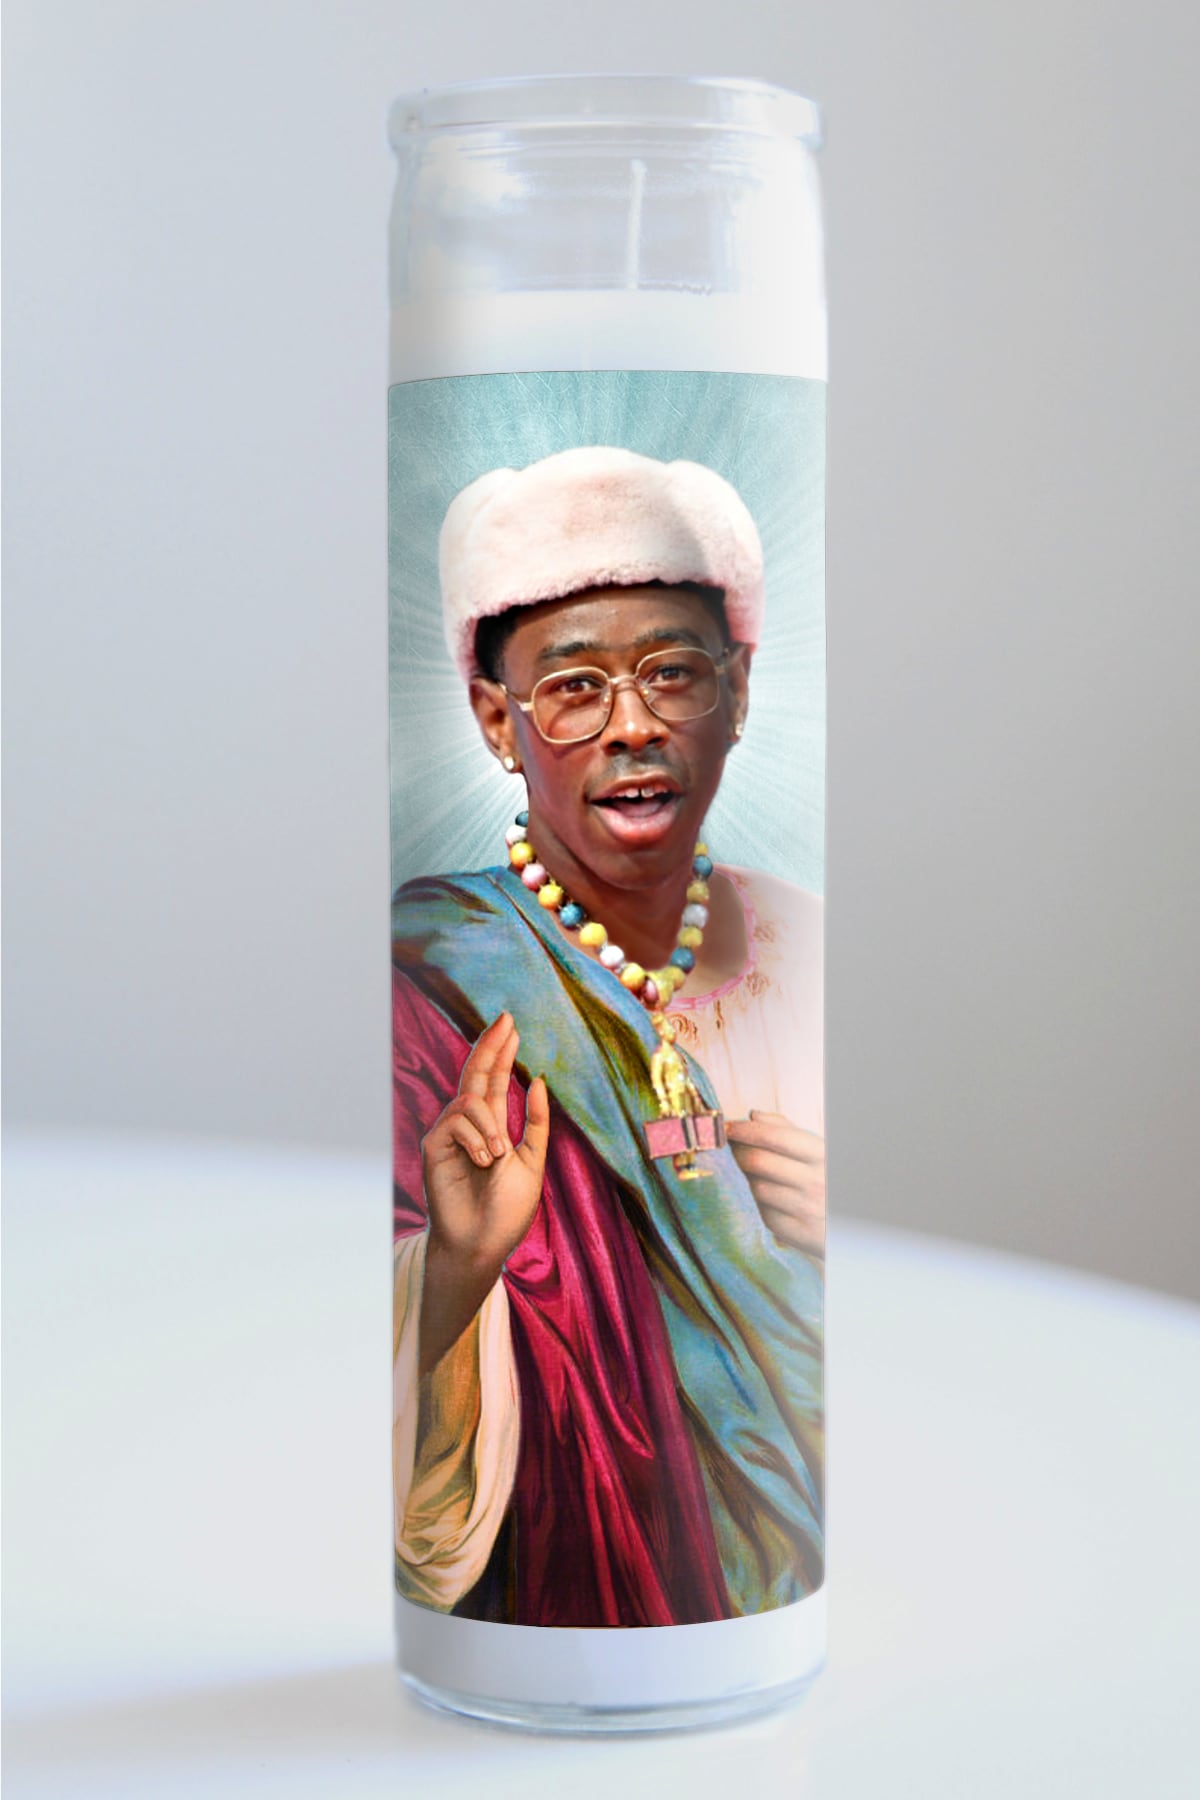 Tyler, the Creator "Boudelaire" Candle